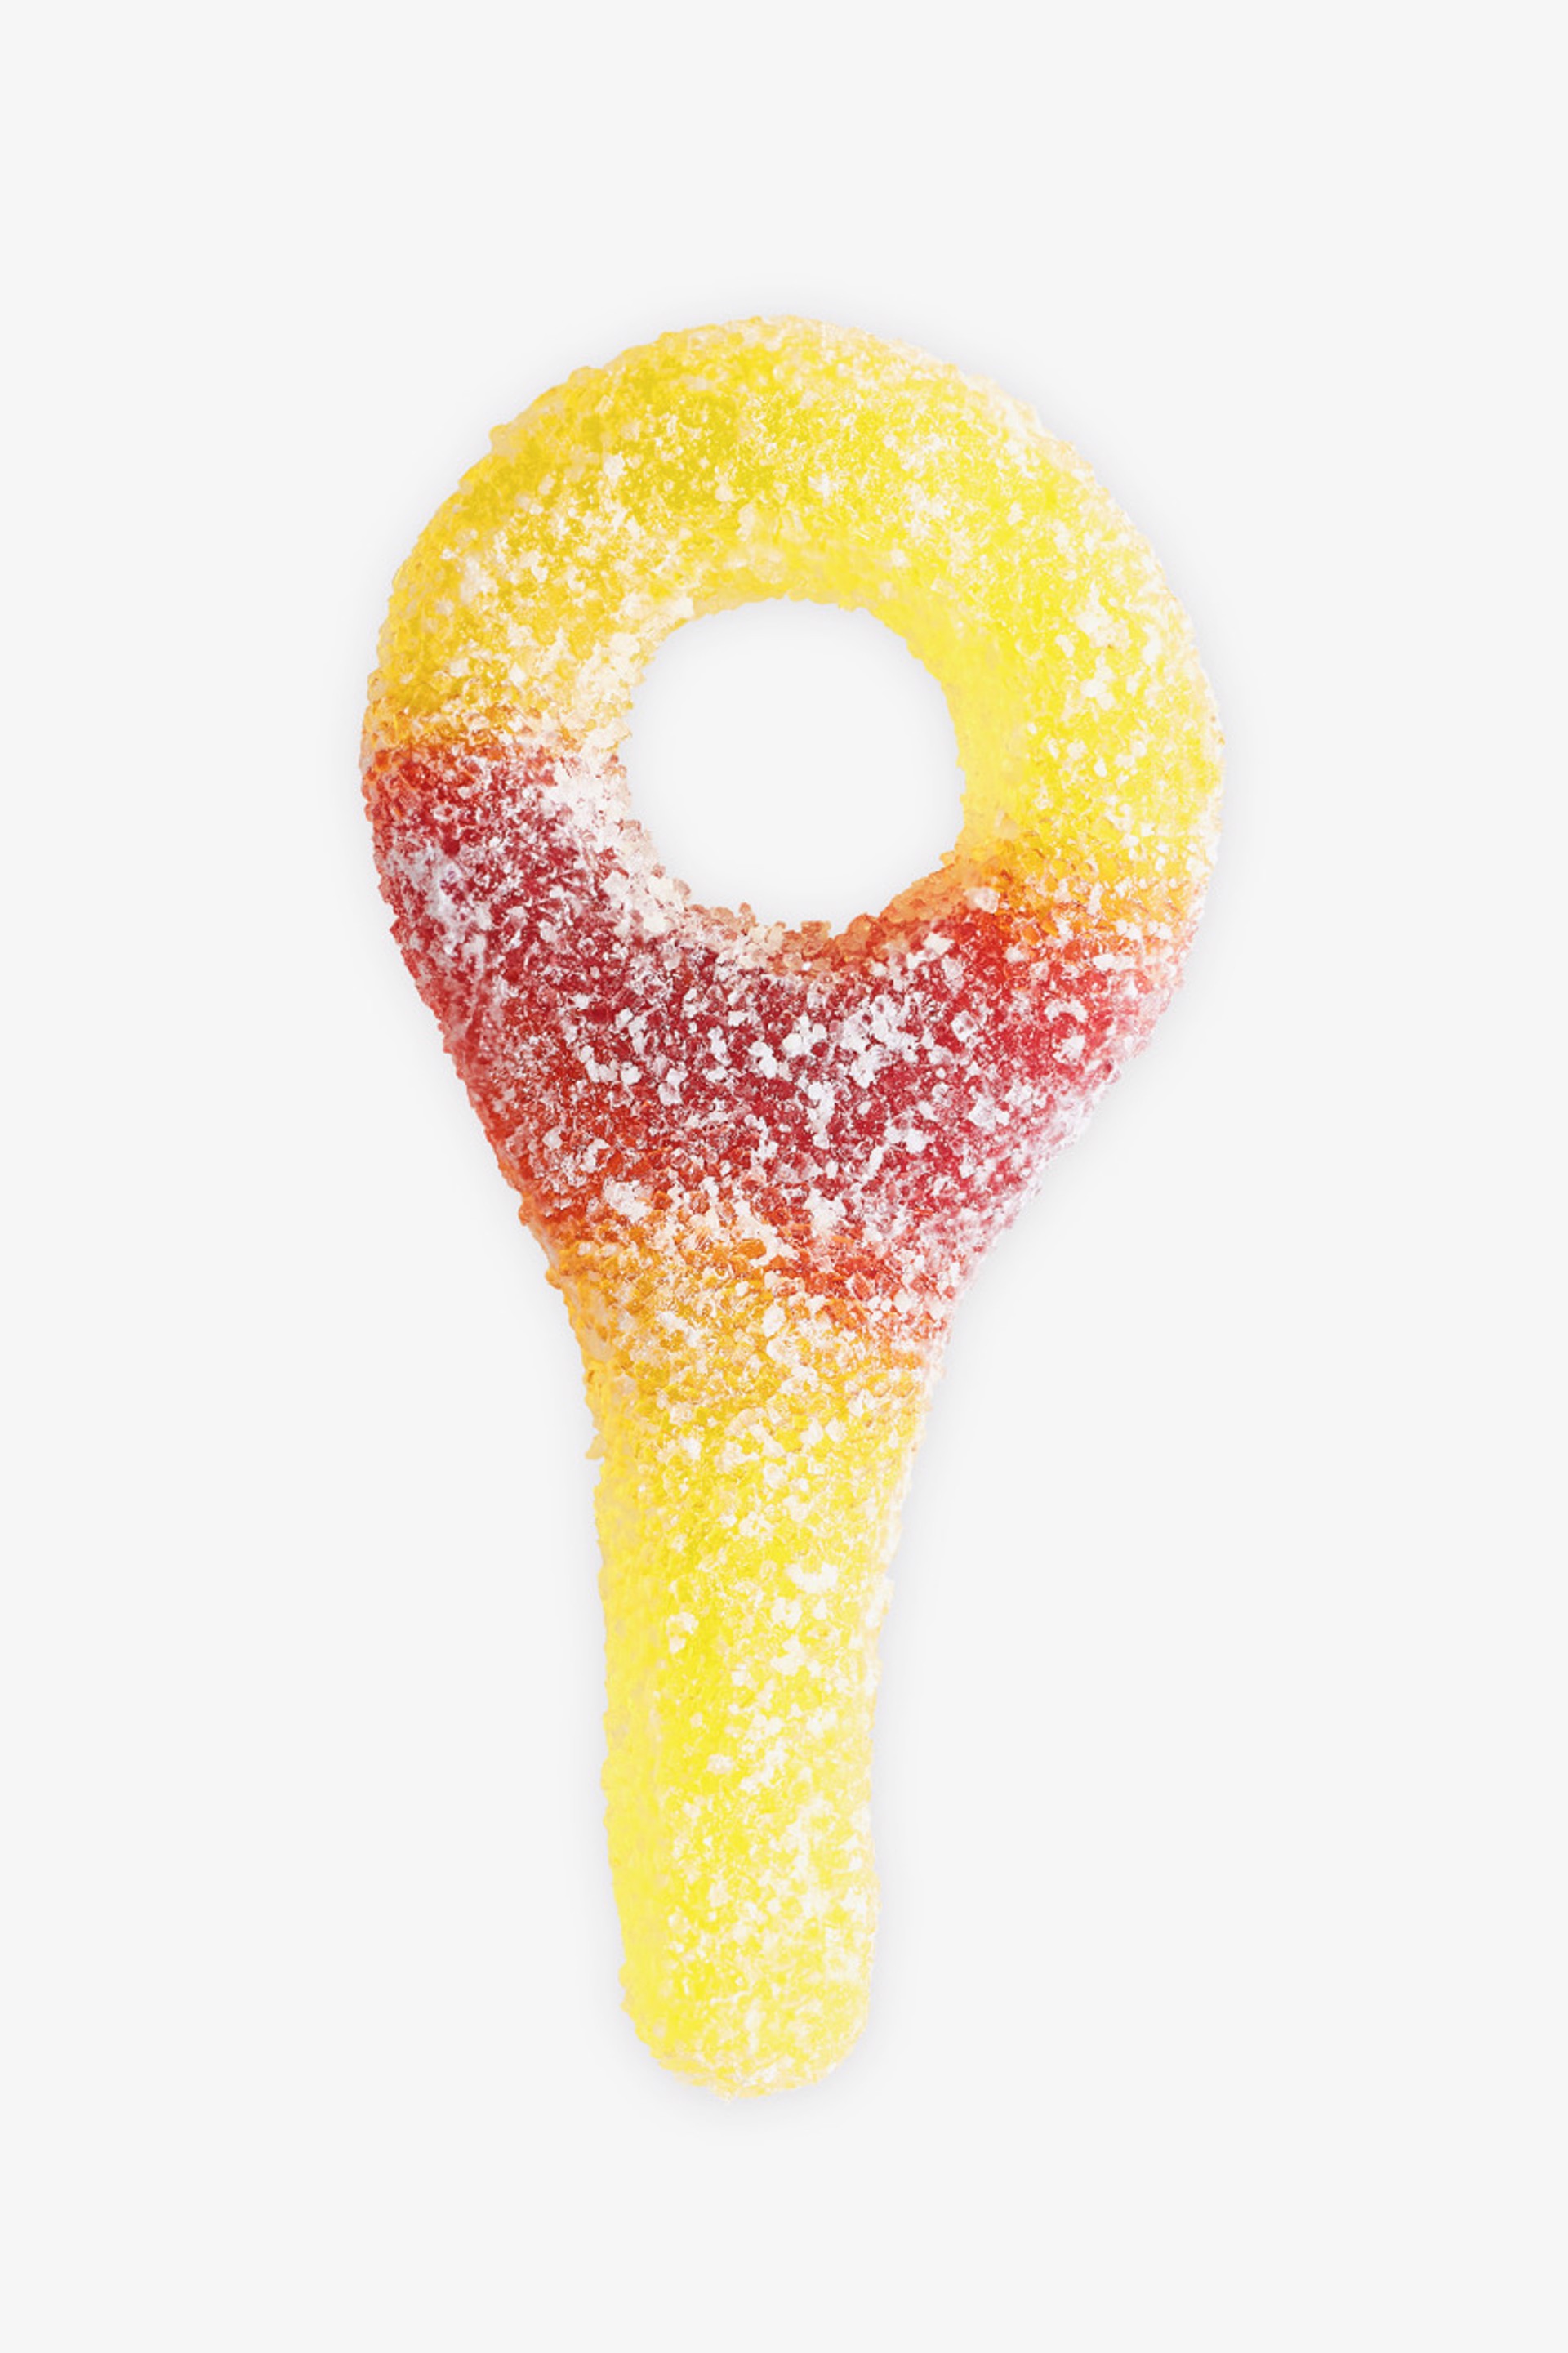 Sour Key - Yellow / Brown by Peter Andrew Lusztyk / Refined Sugar